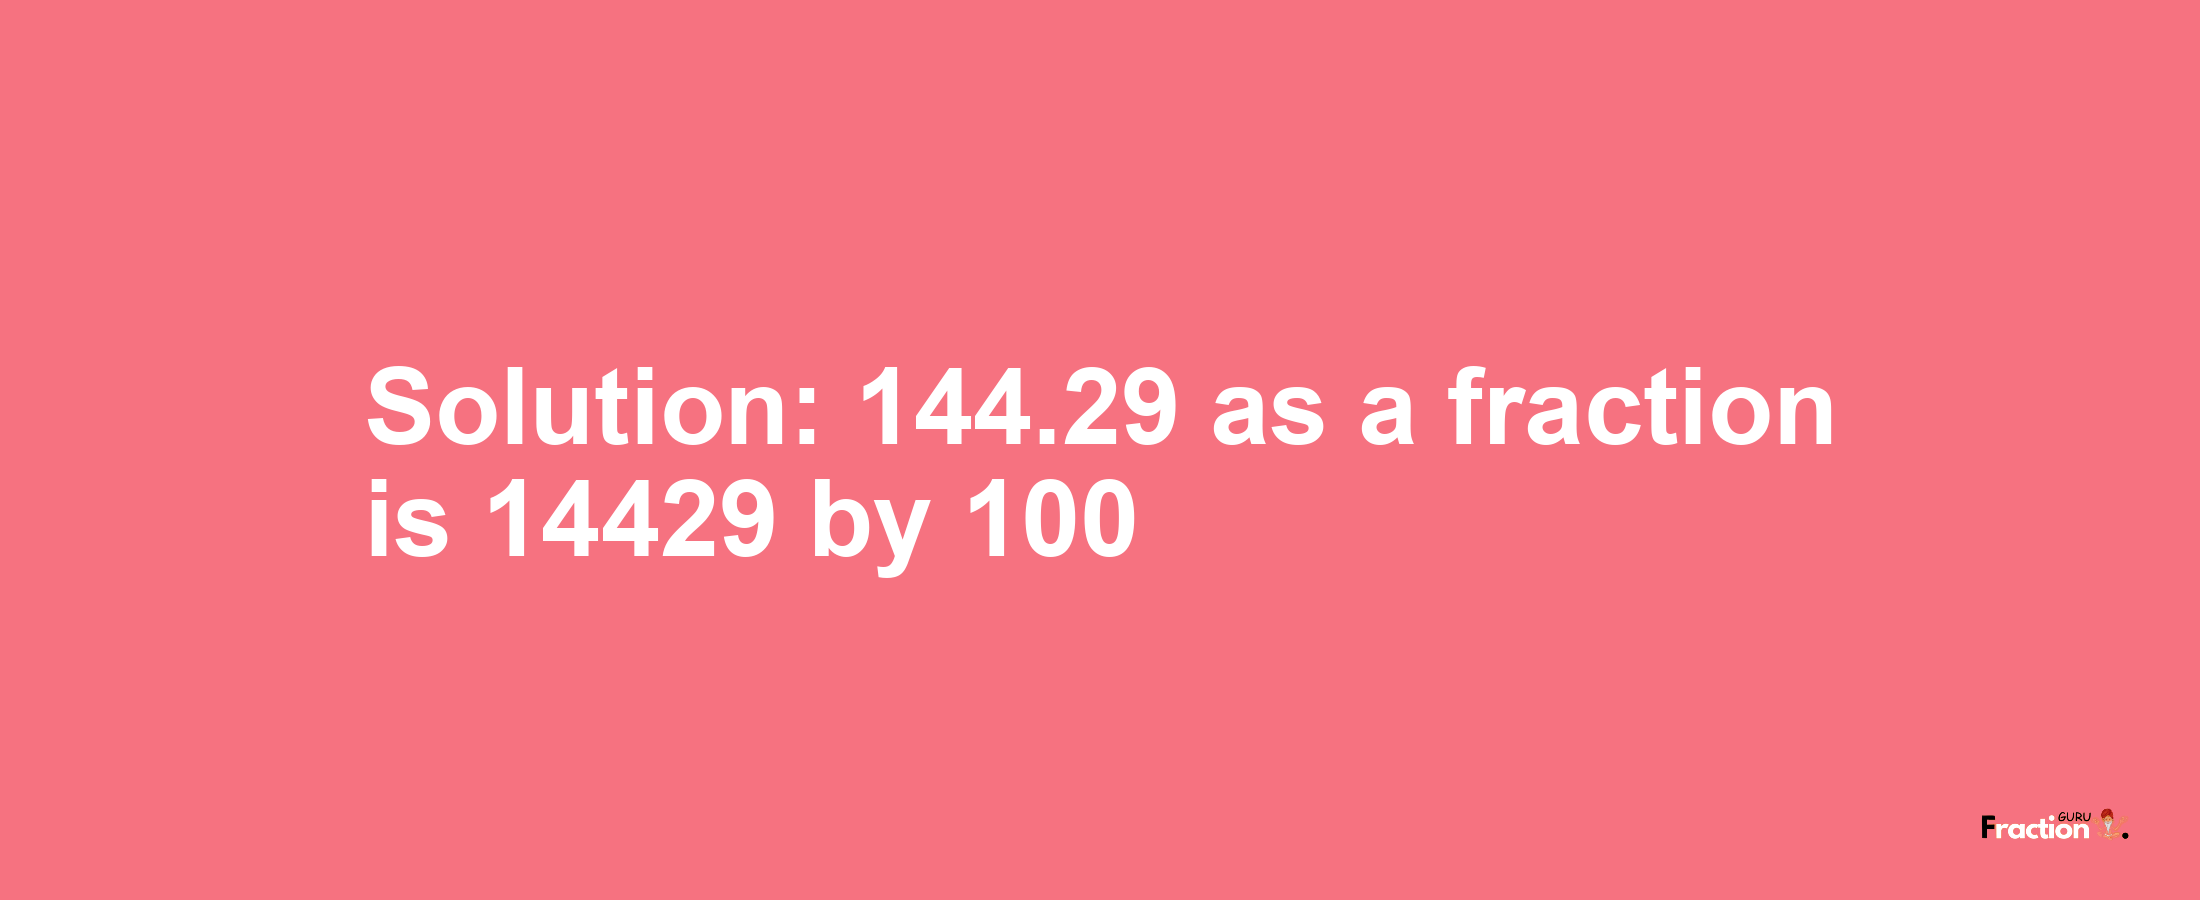 Solution:144.29 as a fraction is 14429/100